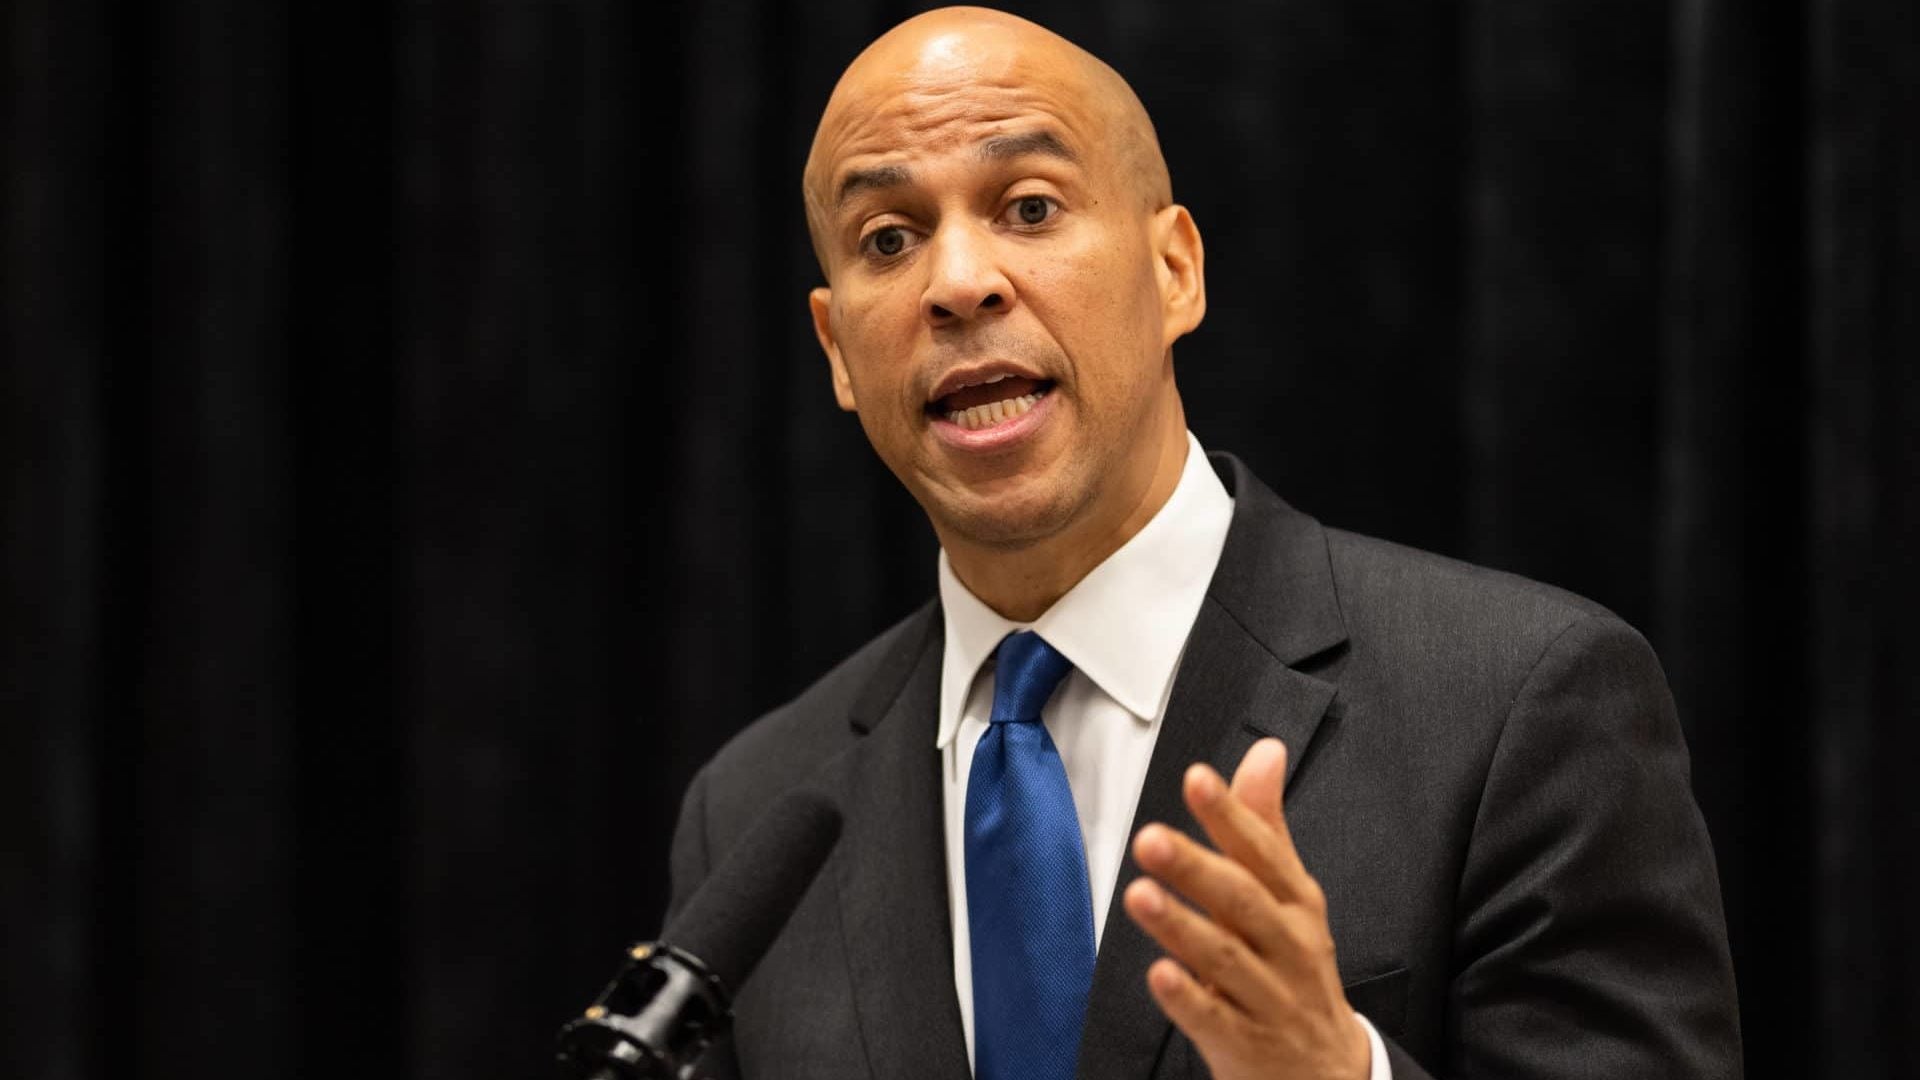 Cory Booker Calls For Defense Of The 'Dream' During Service To Mark Selma Anniversary